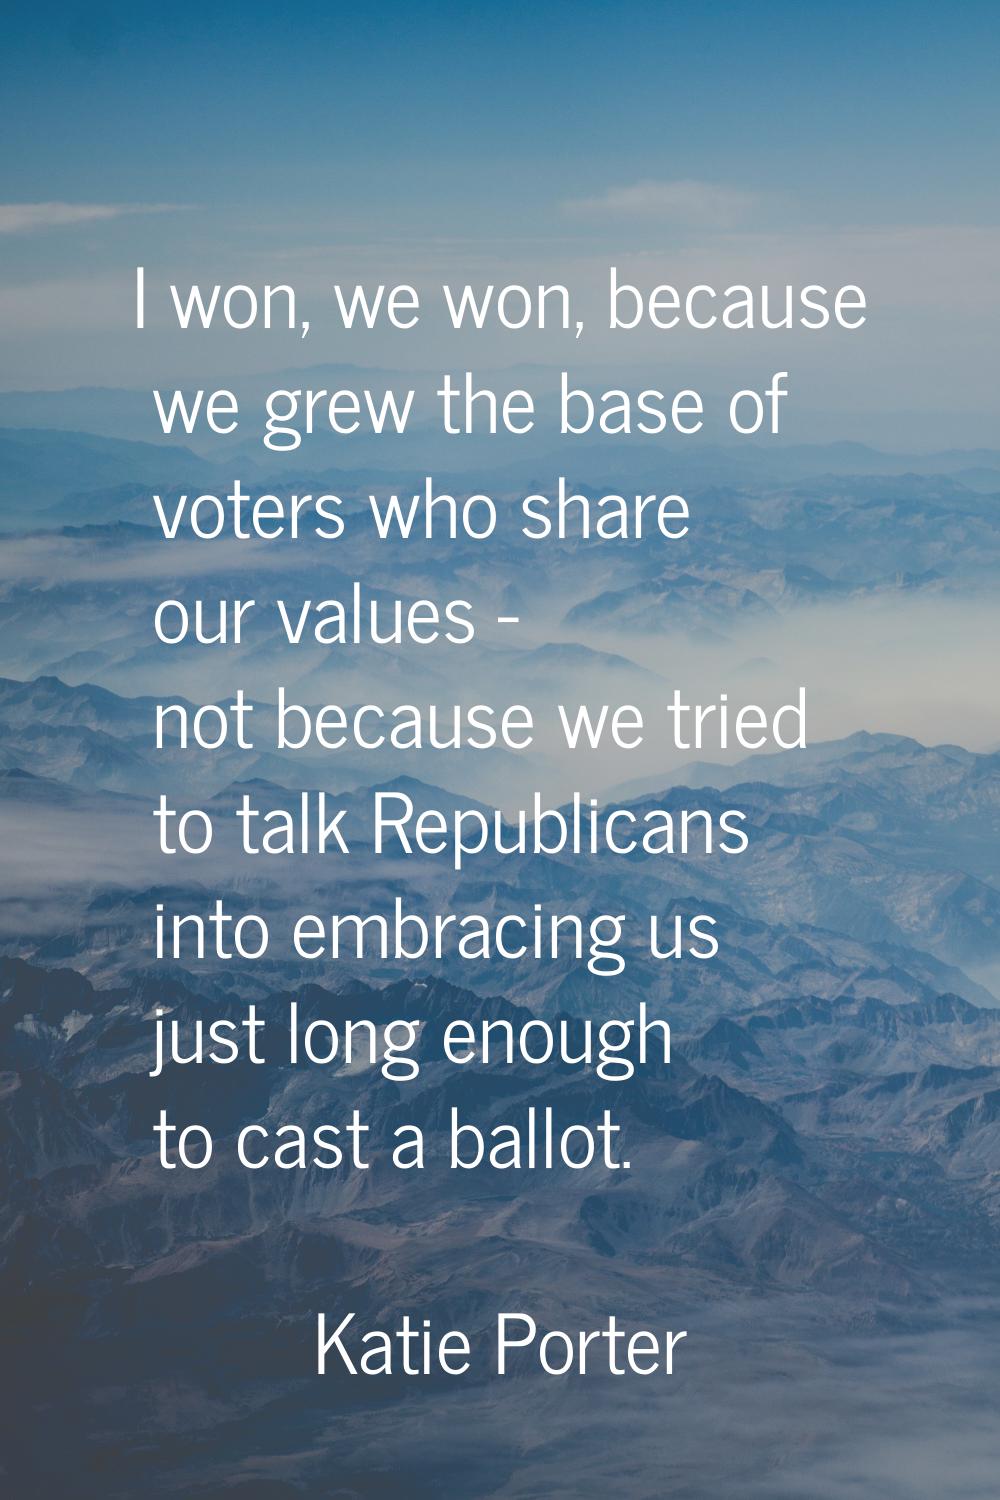 I won, we won, because we grew the base of voters who share our values - not because we tried to ta